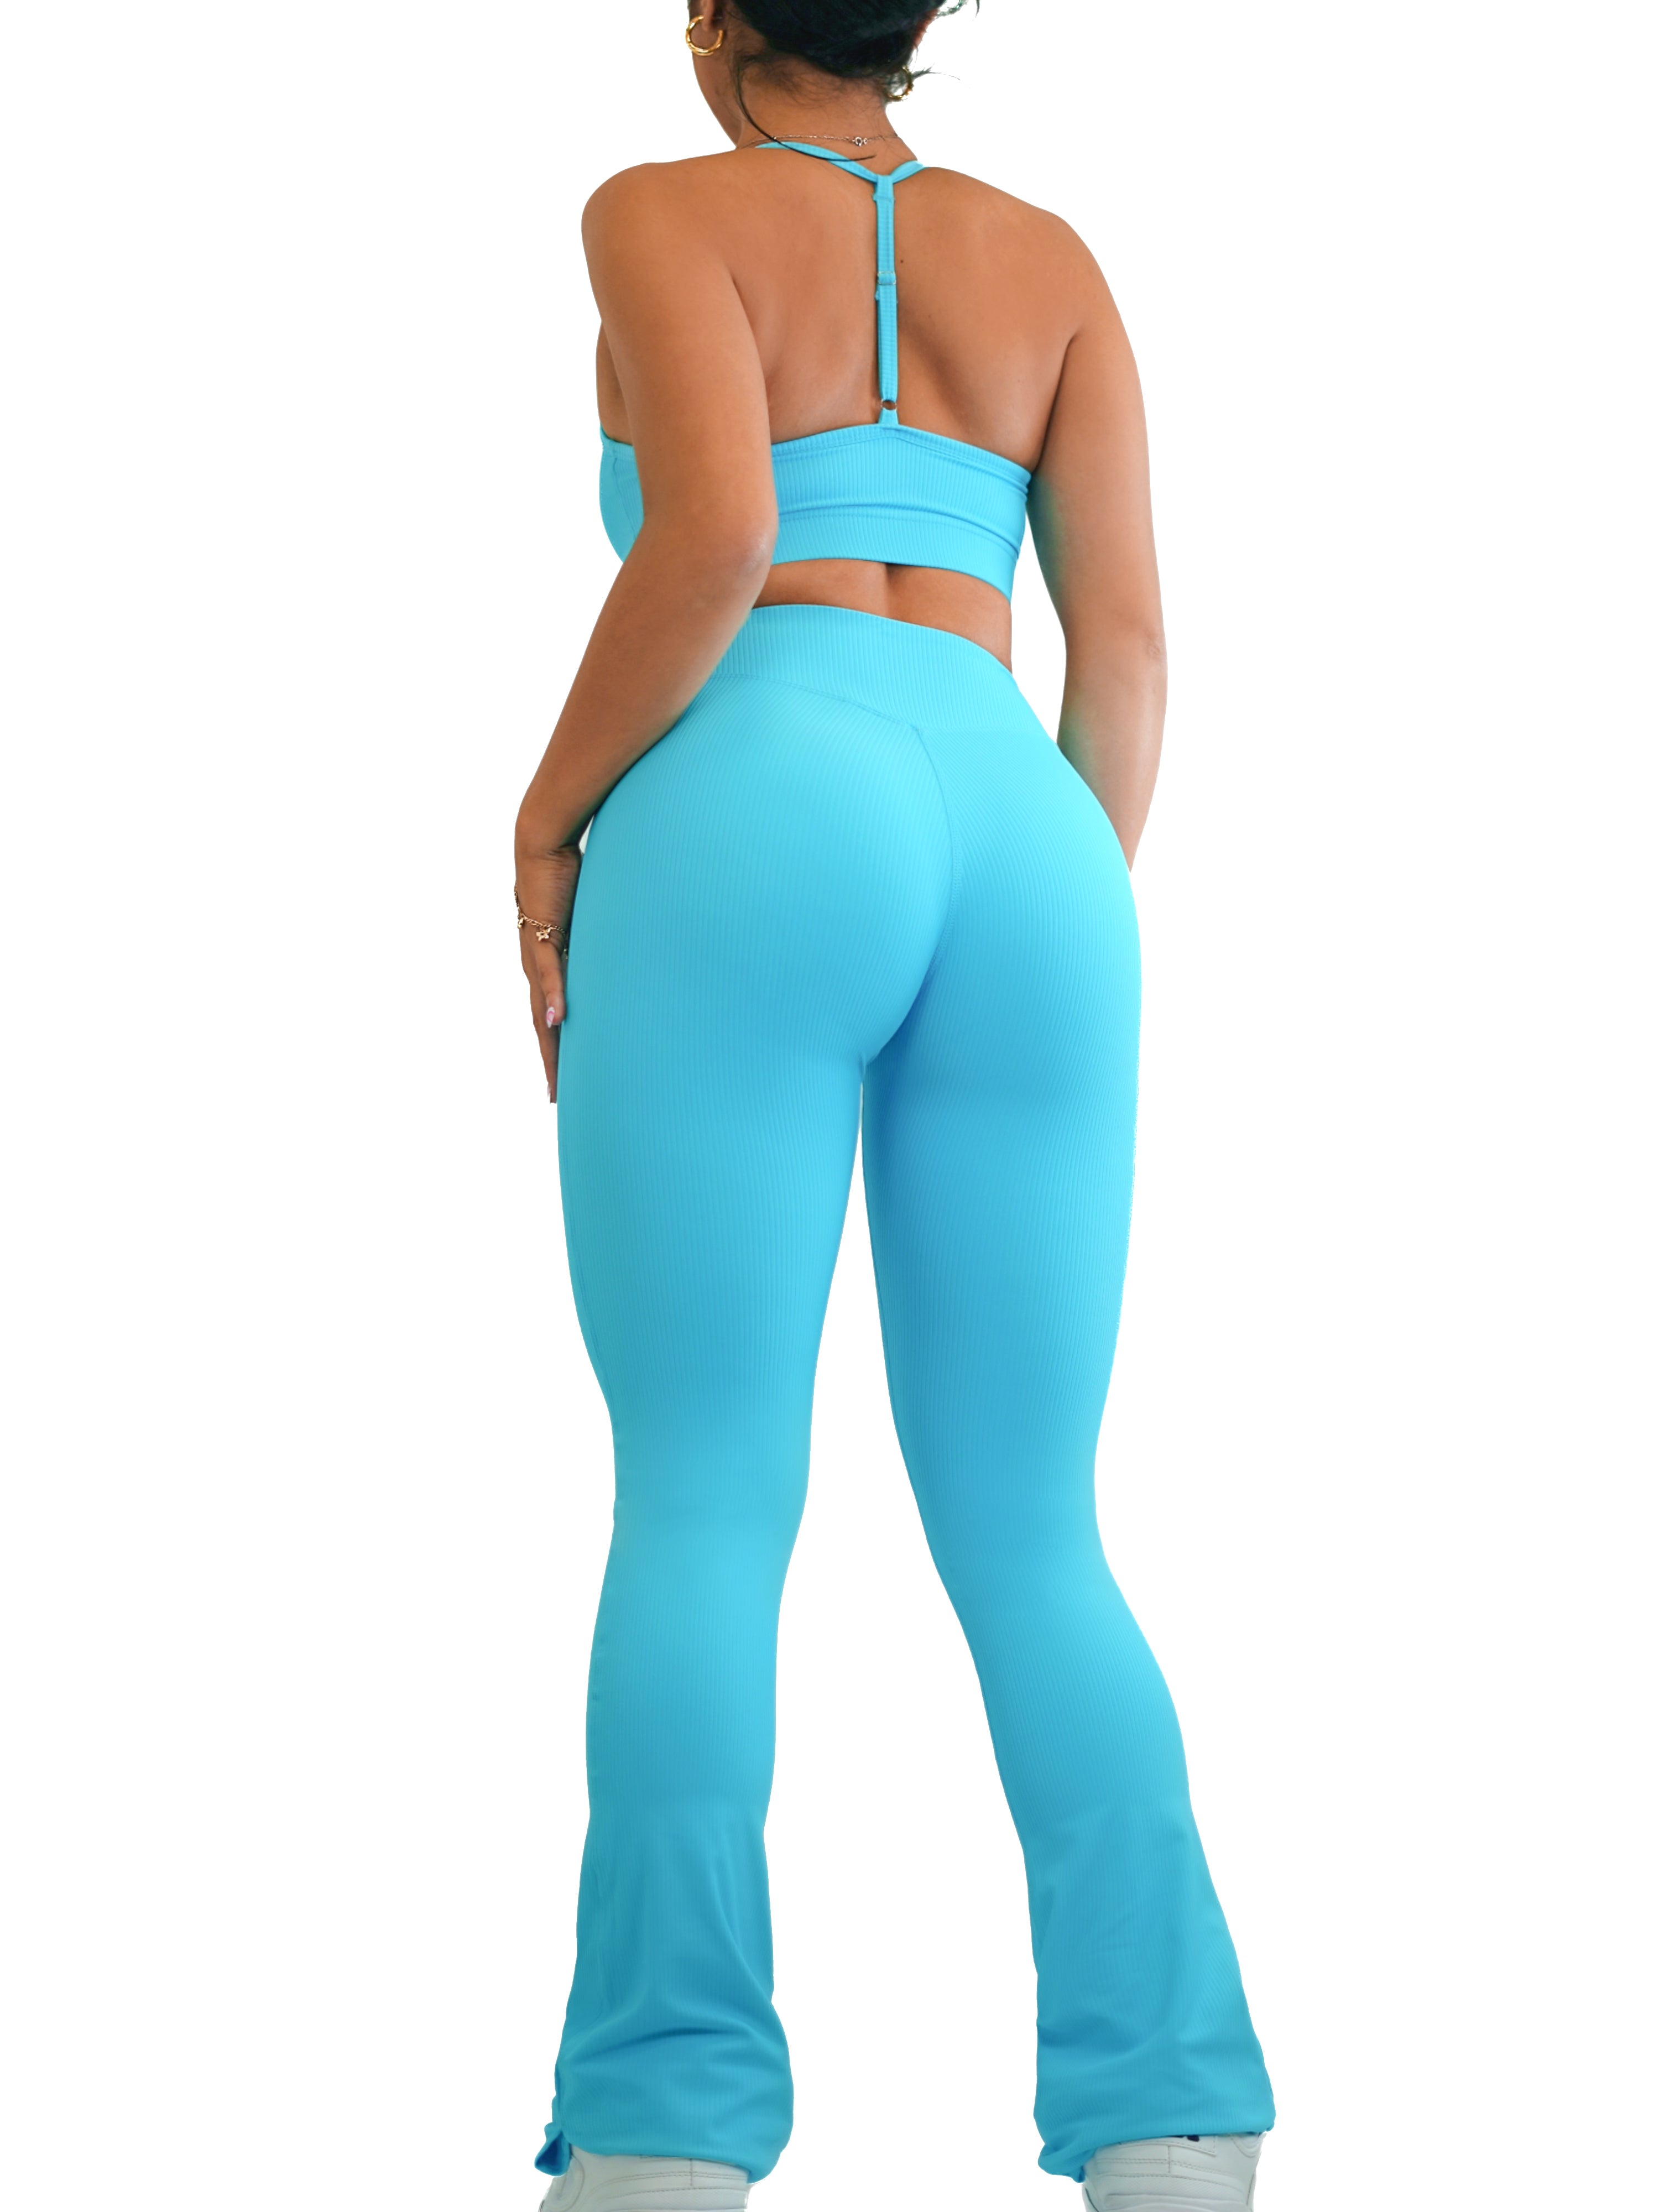 Flare Ribbed Athletic Leggings (Vice Blue)